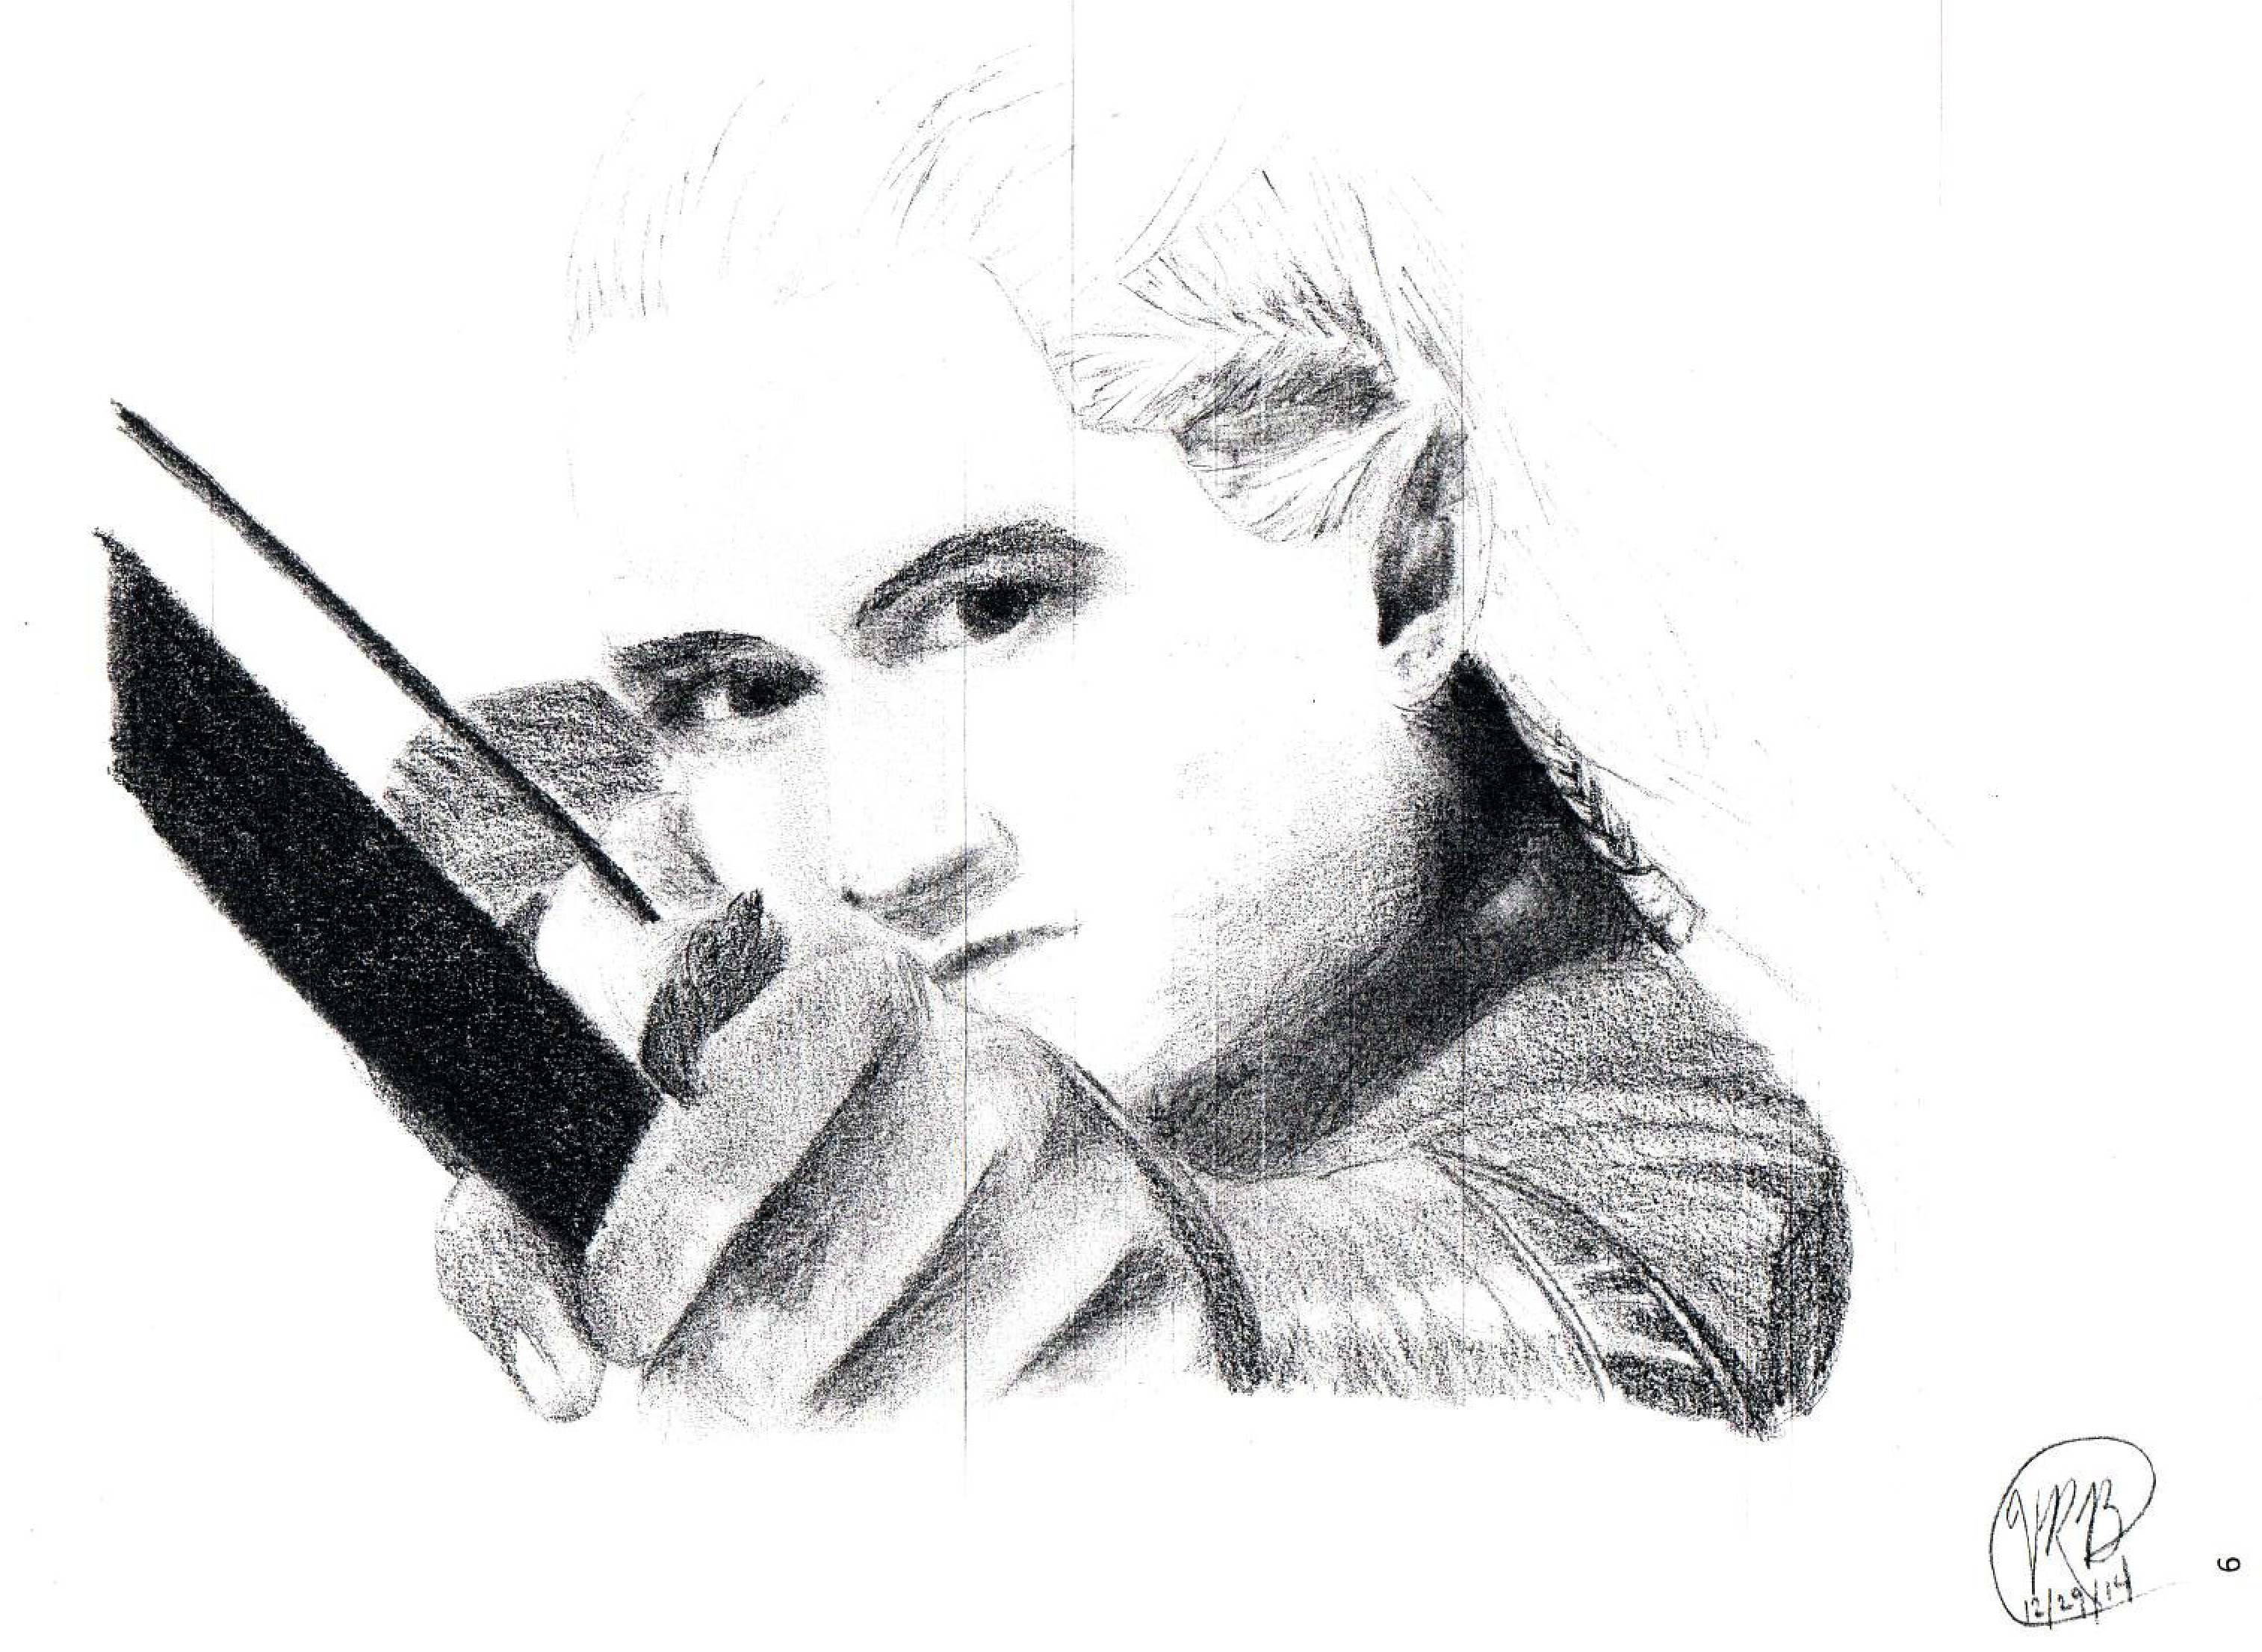 A black and white sketch of a man holding a bow